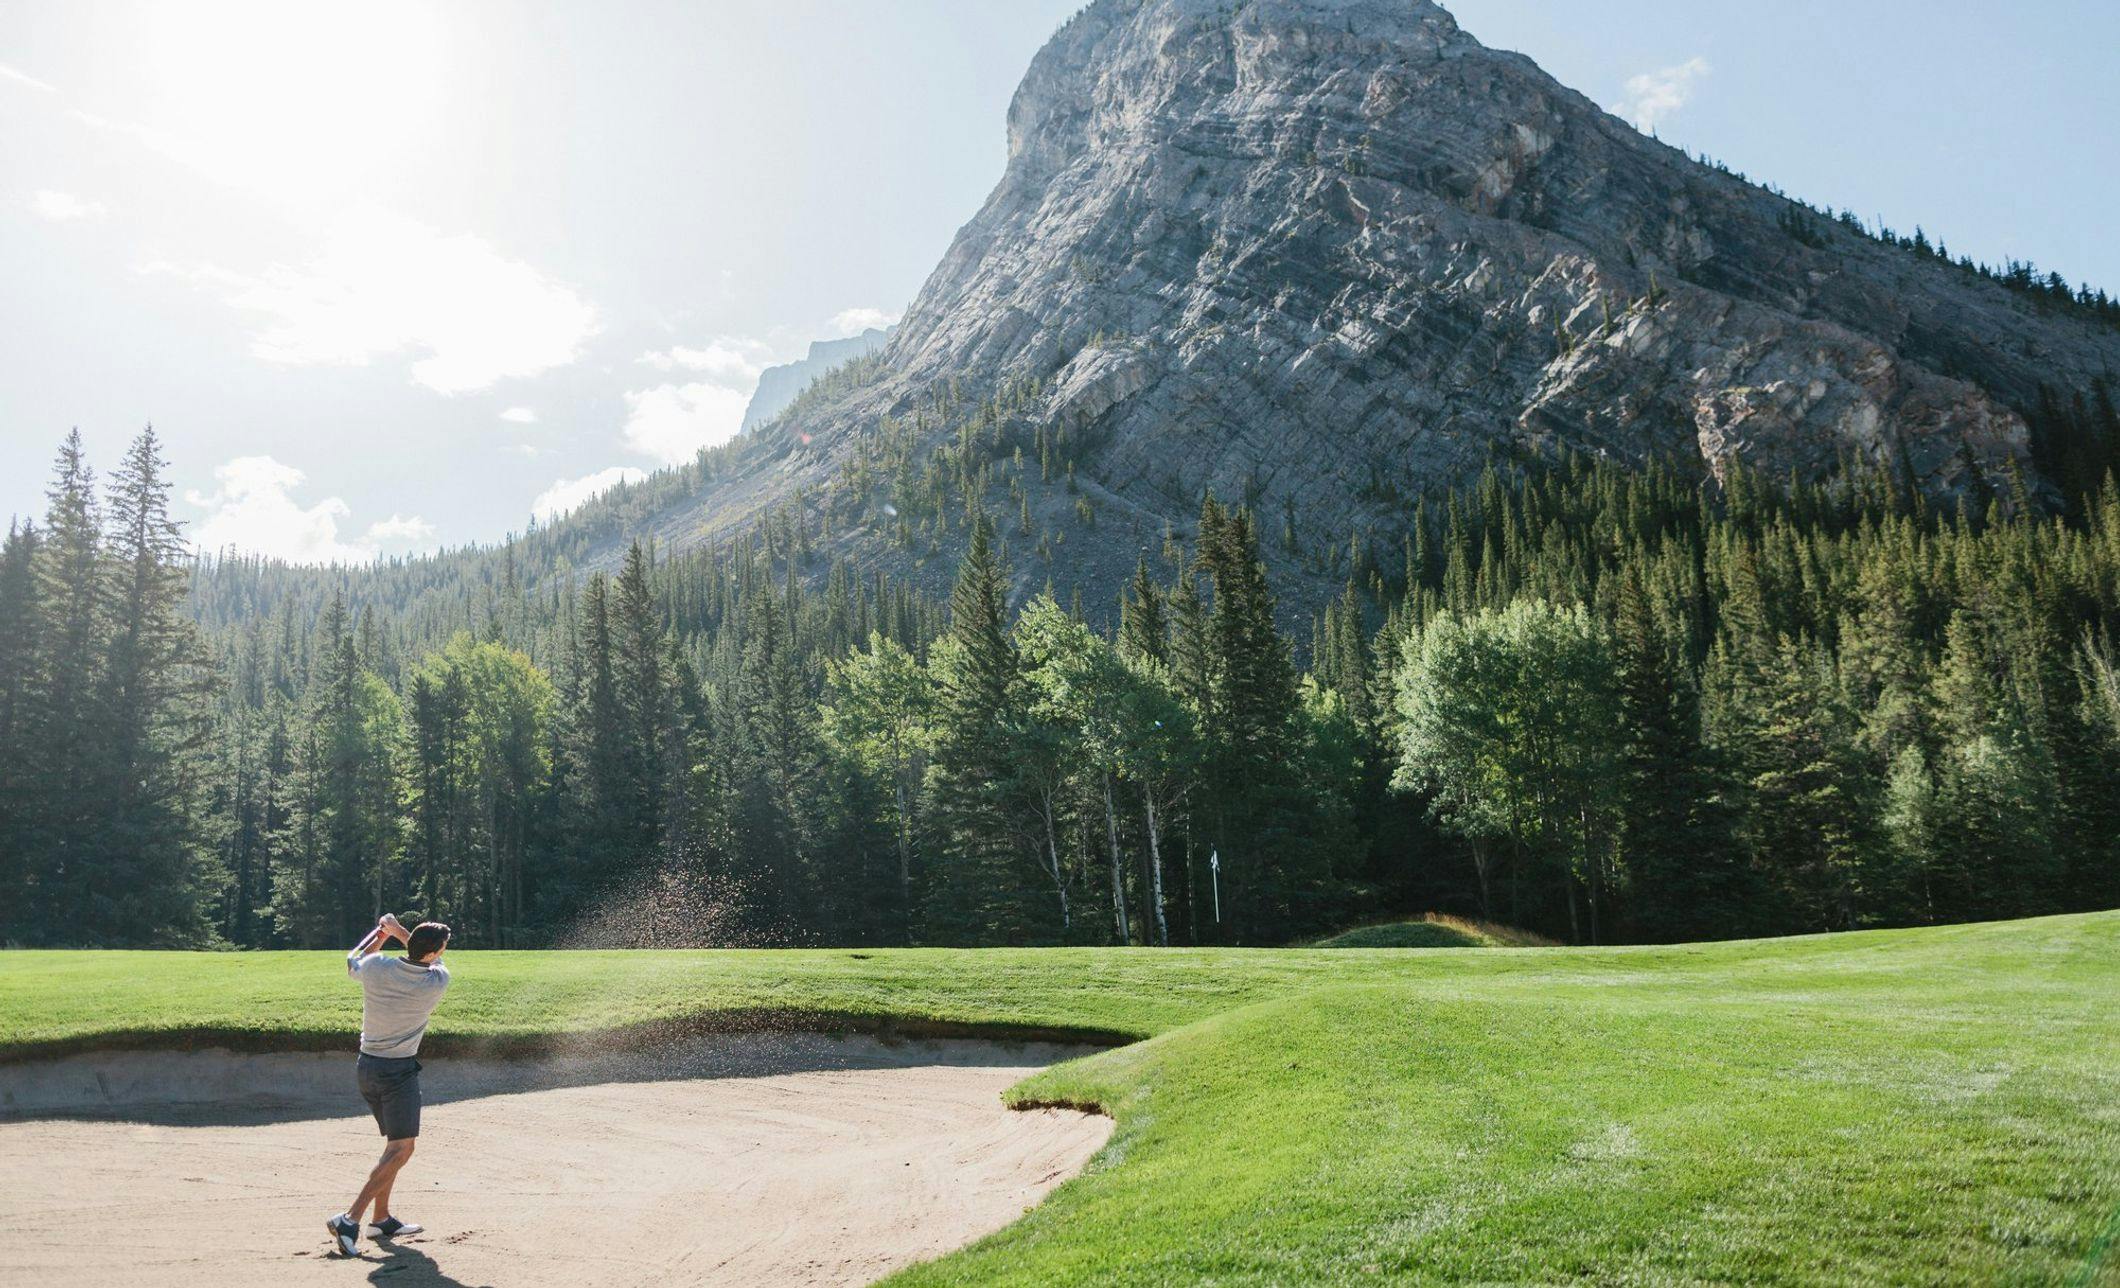 A golfer takes aim on a pristine green course framed by stunning mountains and a clear blue sky